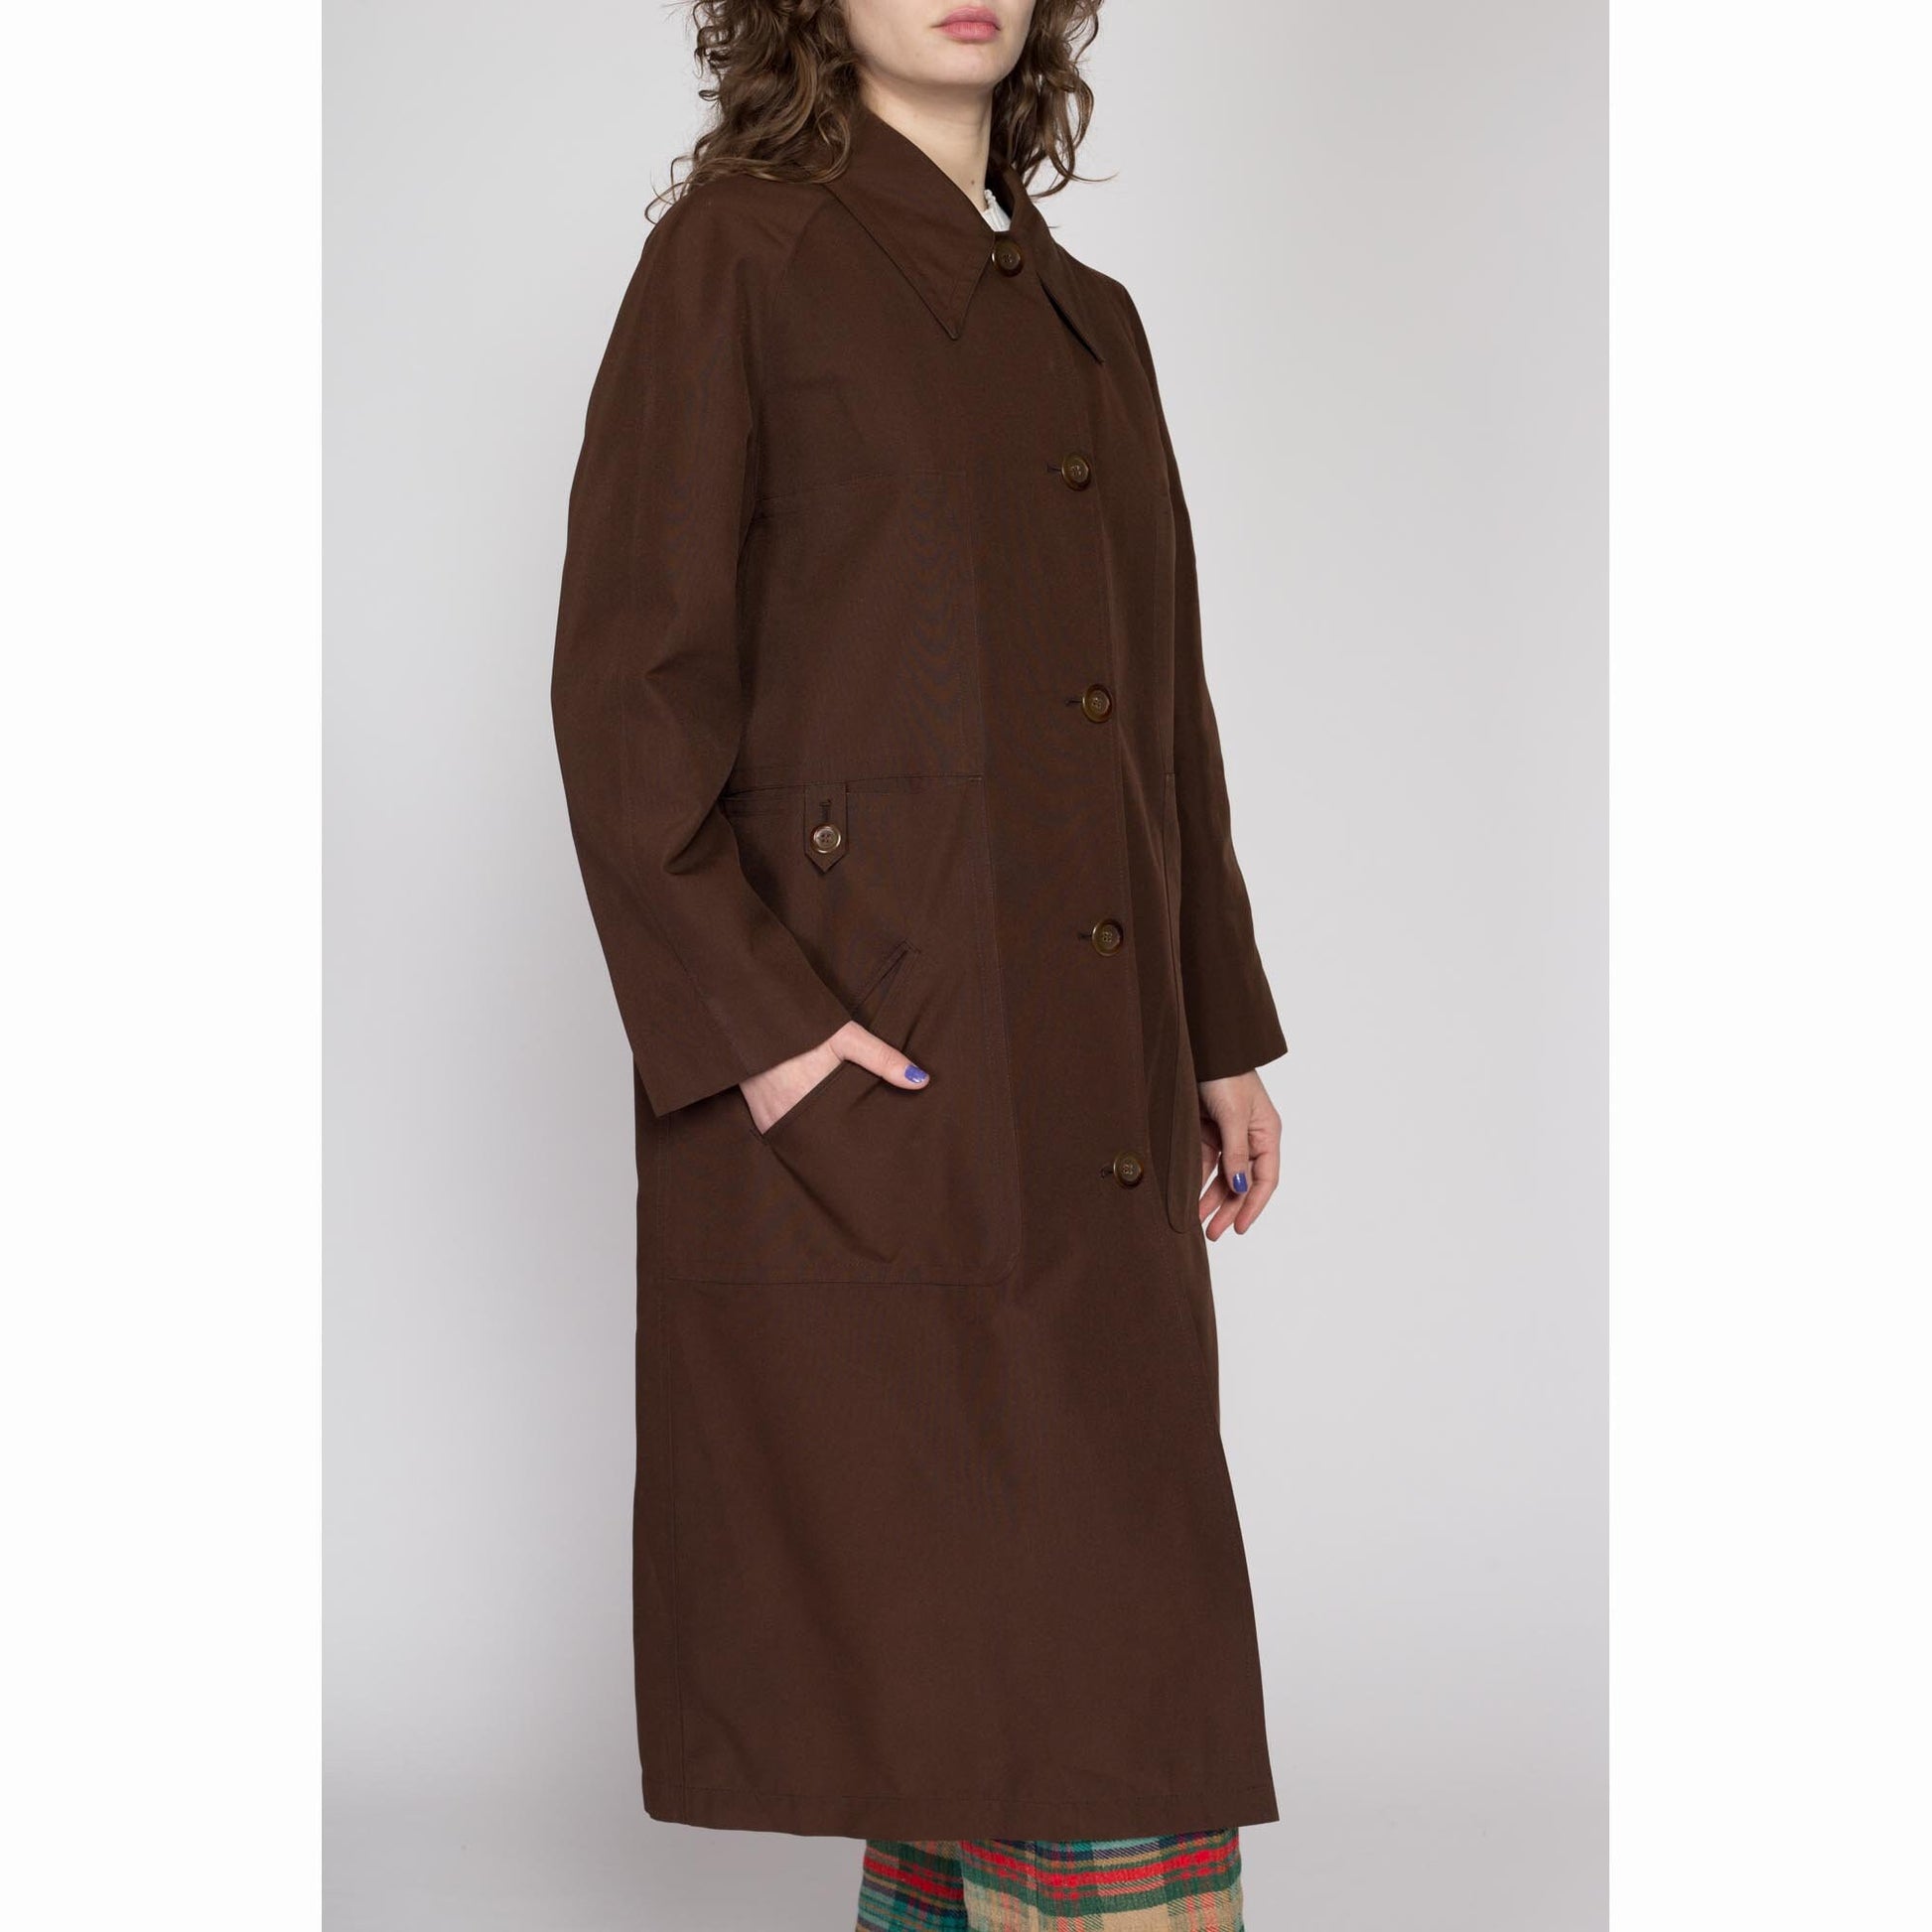 2X 80s Brown Plaid Lined Trench Coat | Vintage Misty Harbor Minimalist Long Duster Rain Jacket